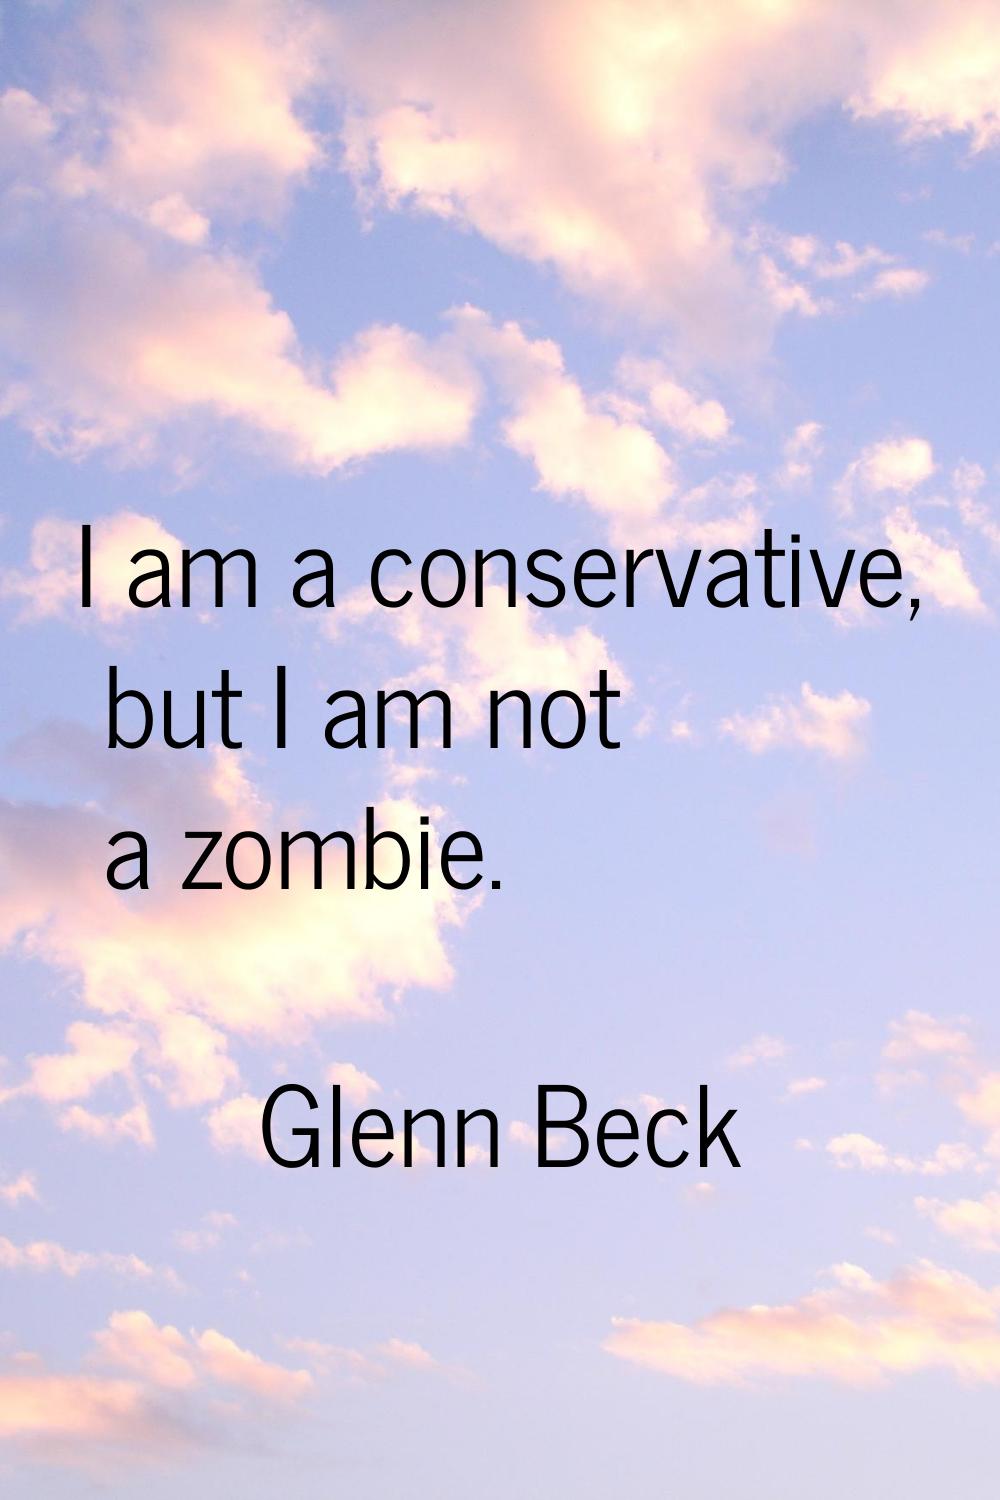 I am a conservative, but I am not a zombie.